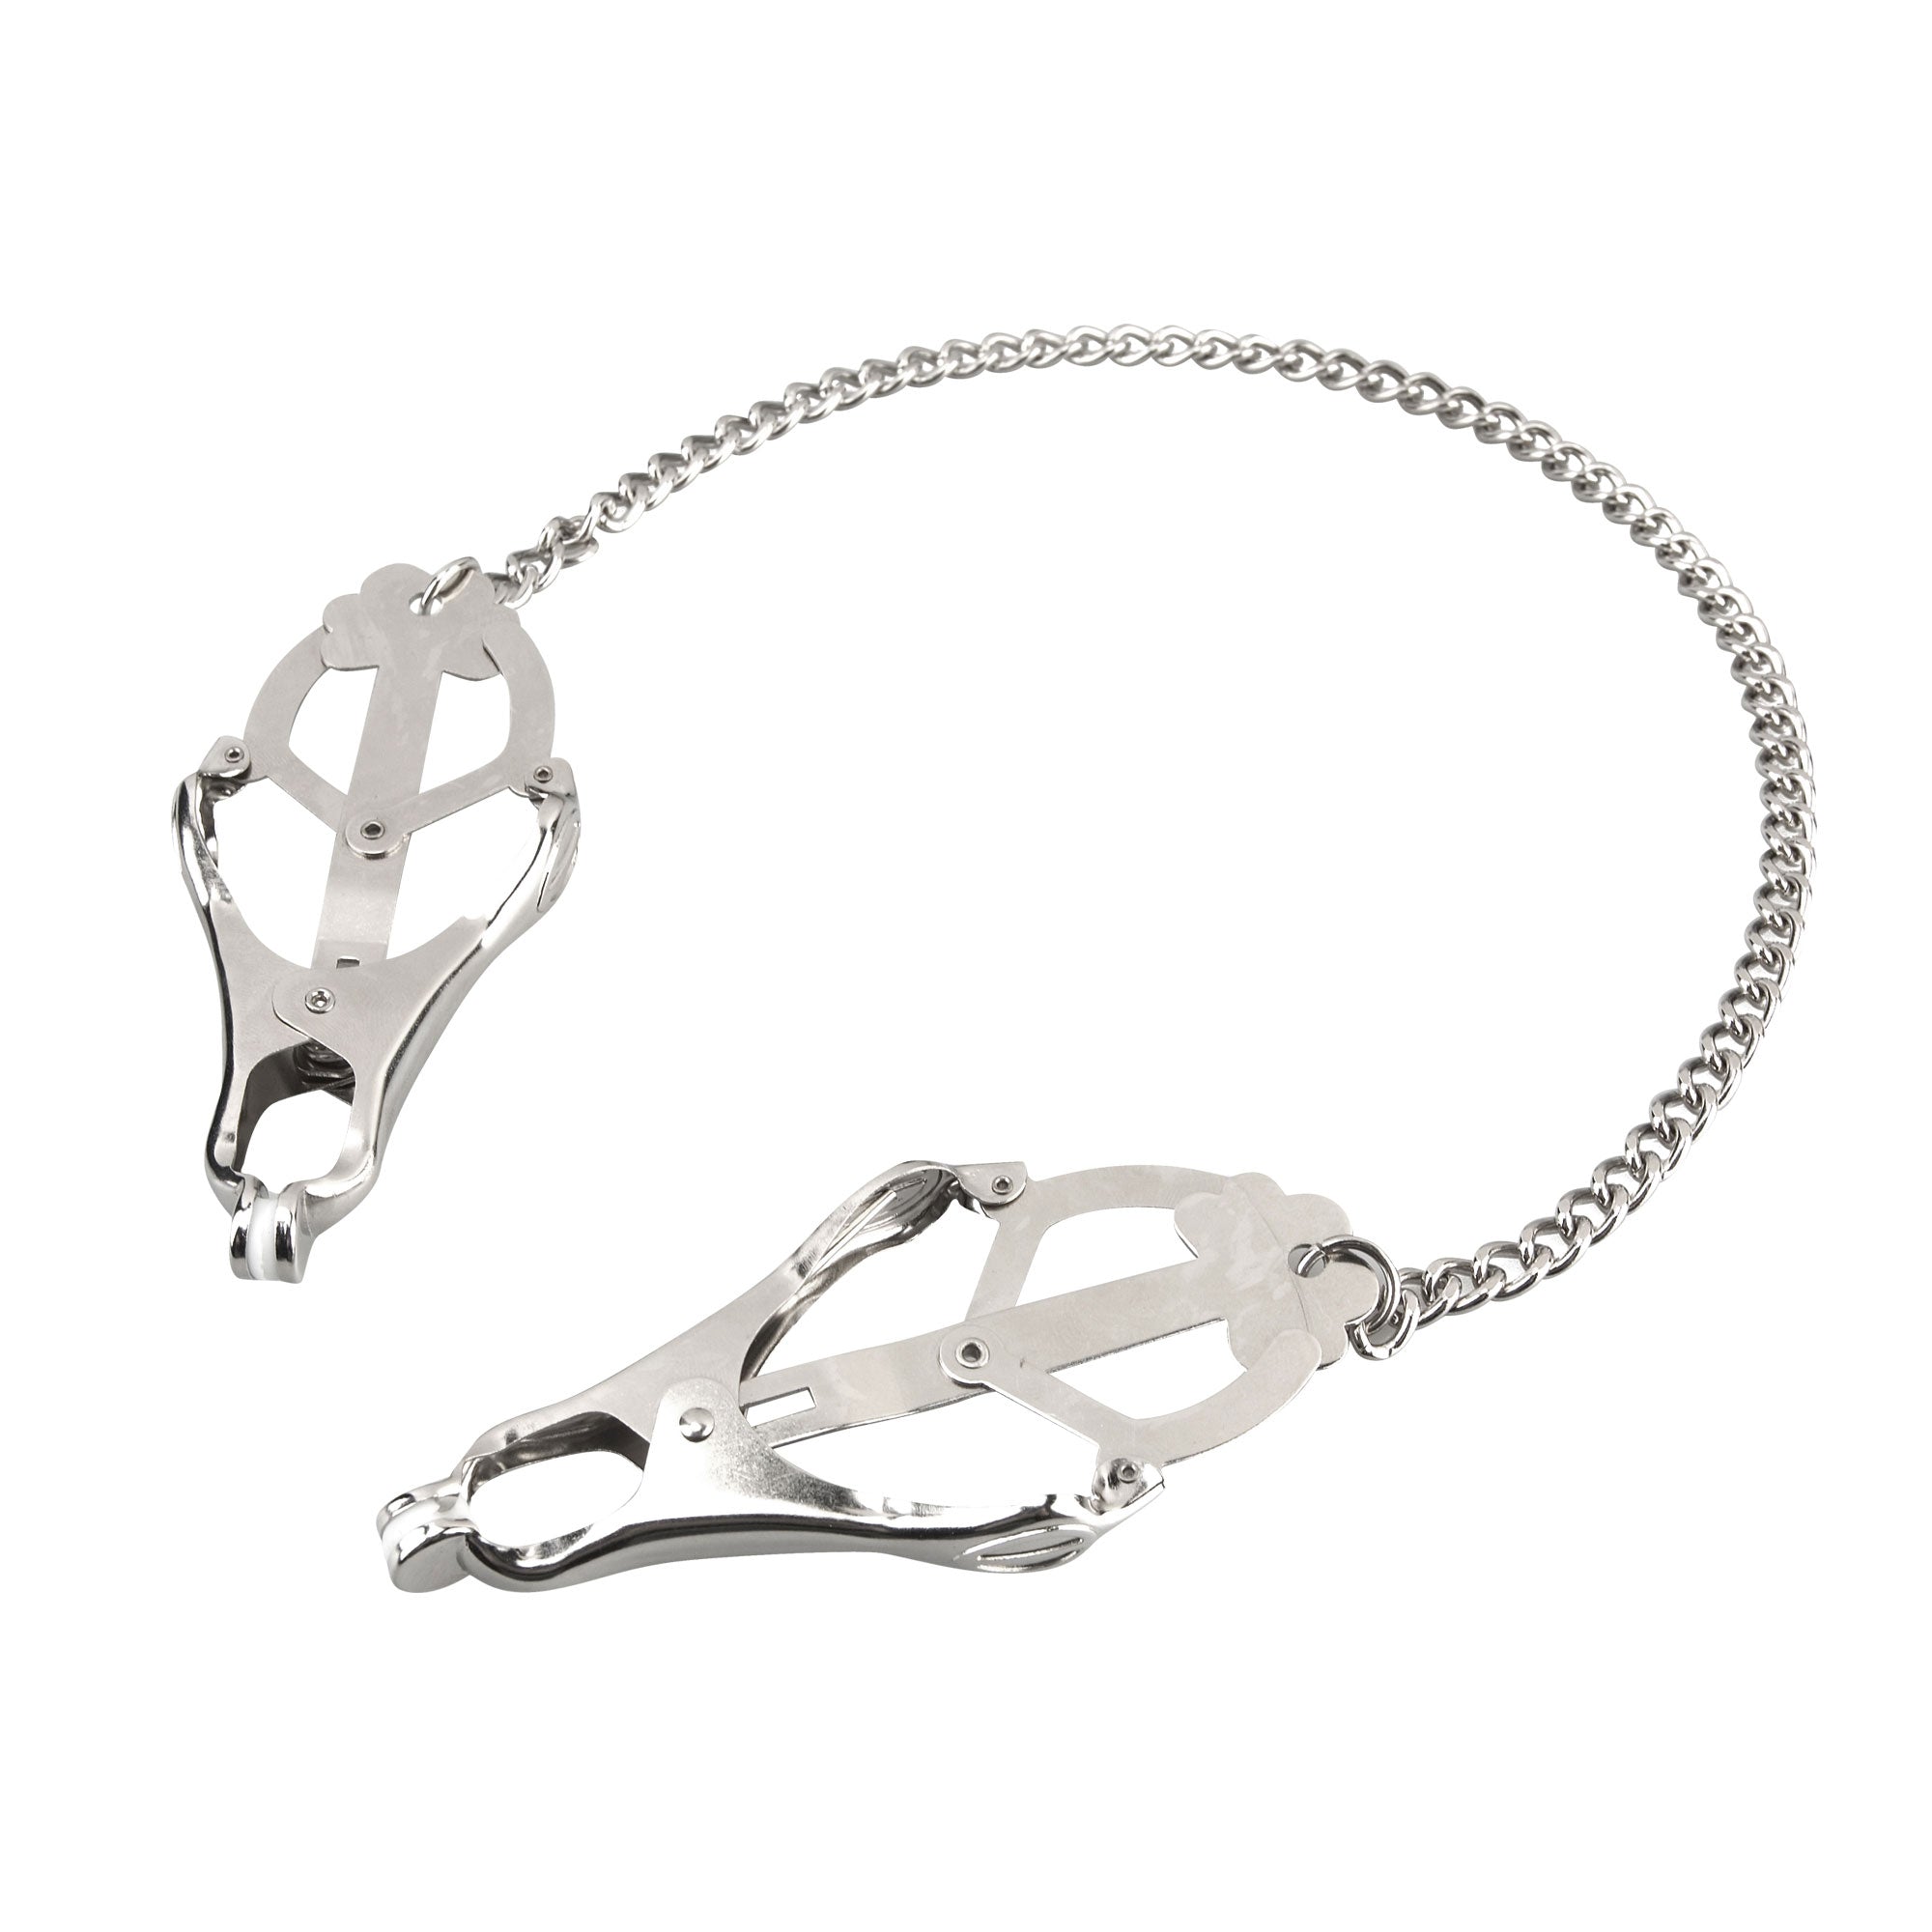 Lux Fetish Japanese Clover Nipple Clamps with Chain - Nipple Clips 